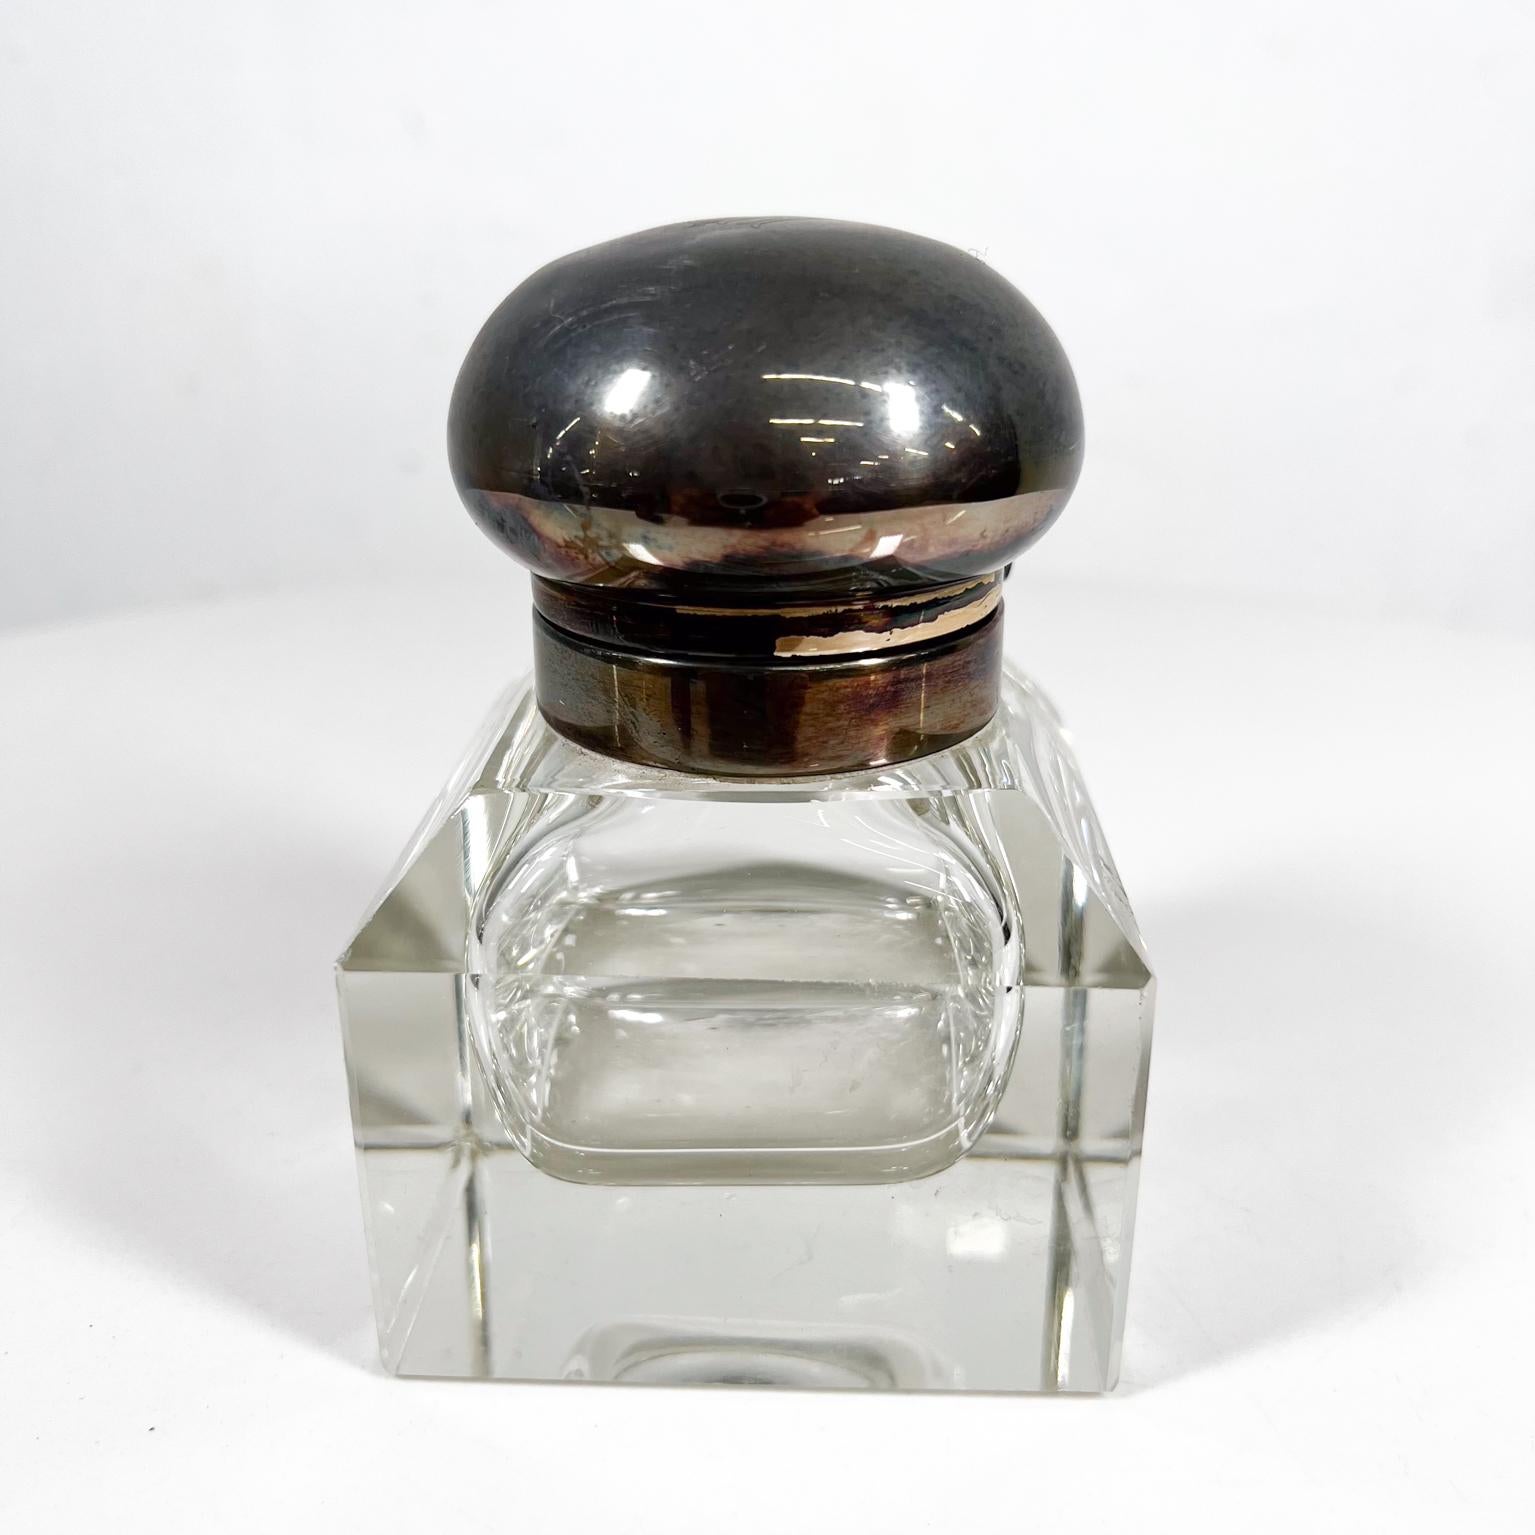 Modern Vintage Square Glass Ink Well Silver Plated
3 x 3 x 4.5 tall
Original unrestored vintage condition.
See images provided please.